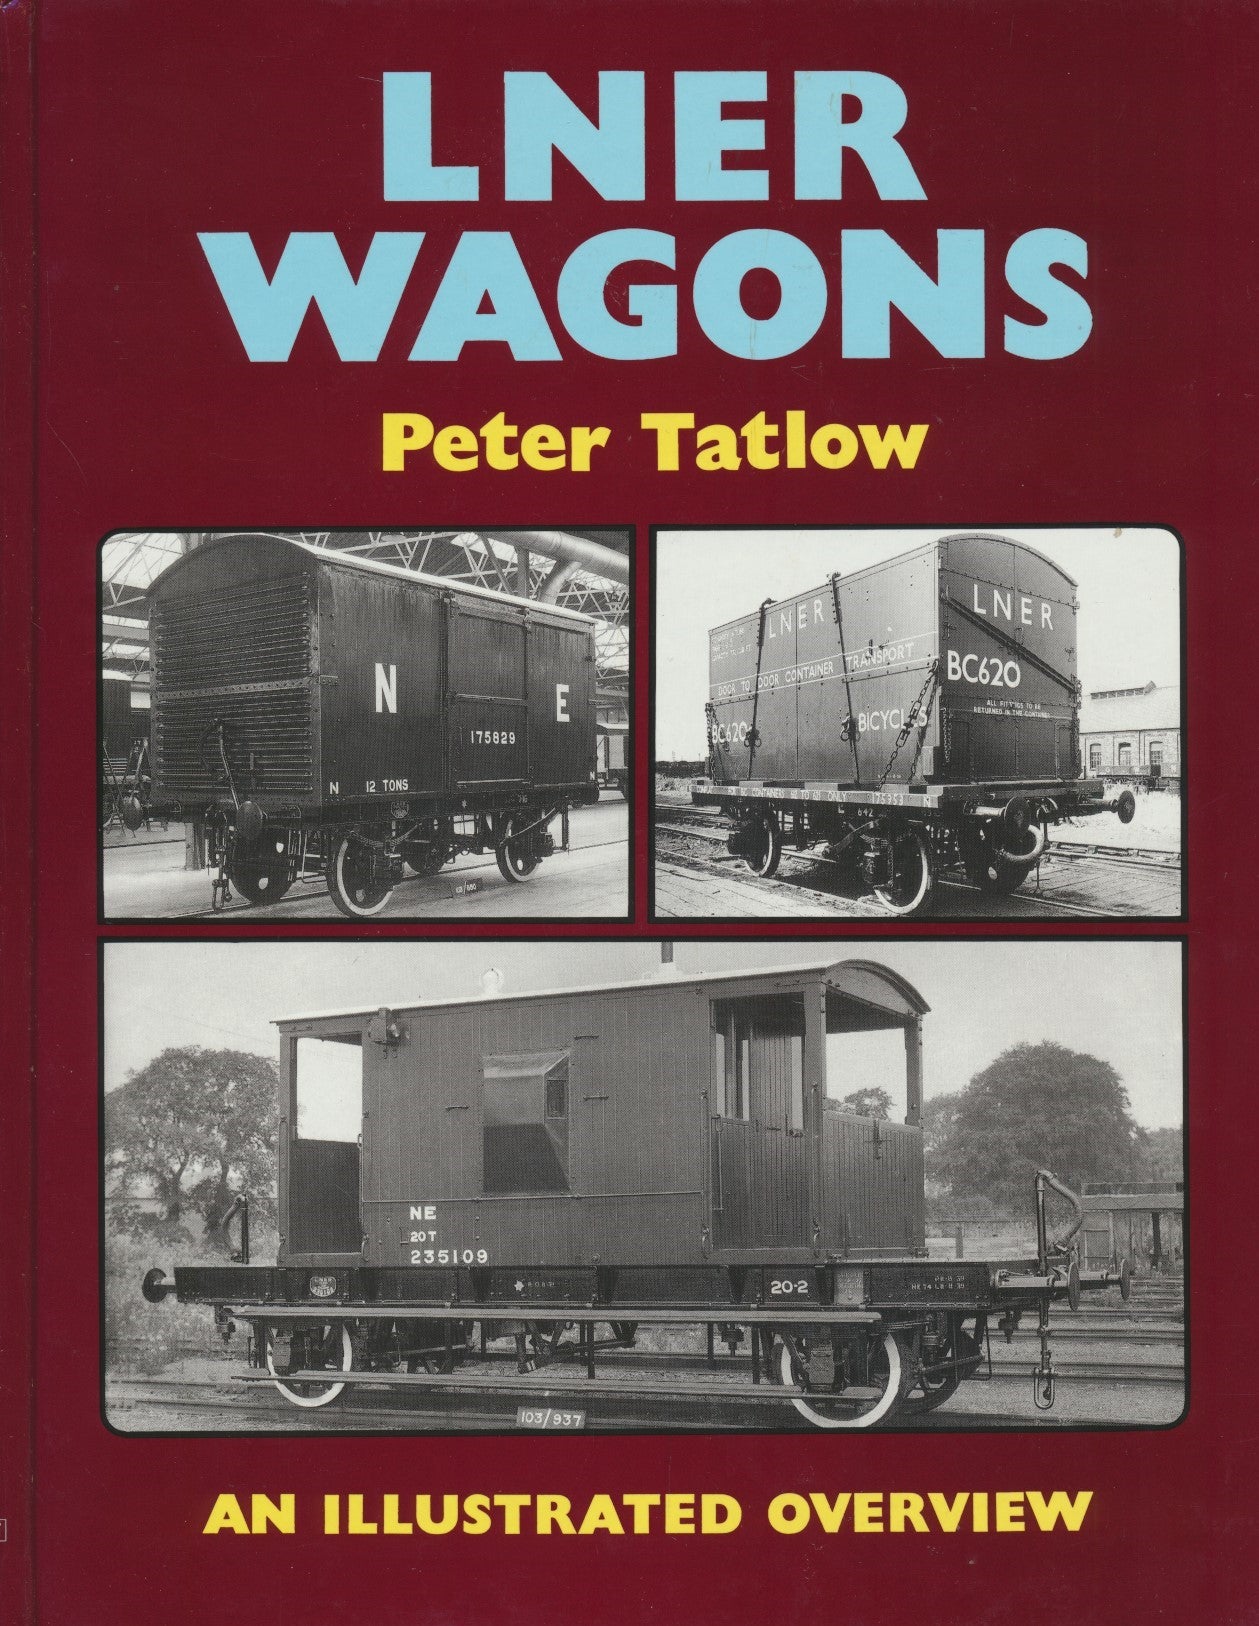 LNER Wagons - An Illustrated Overview